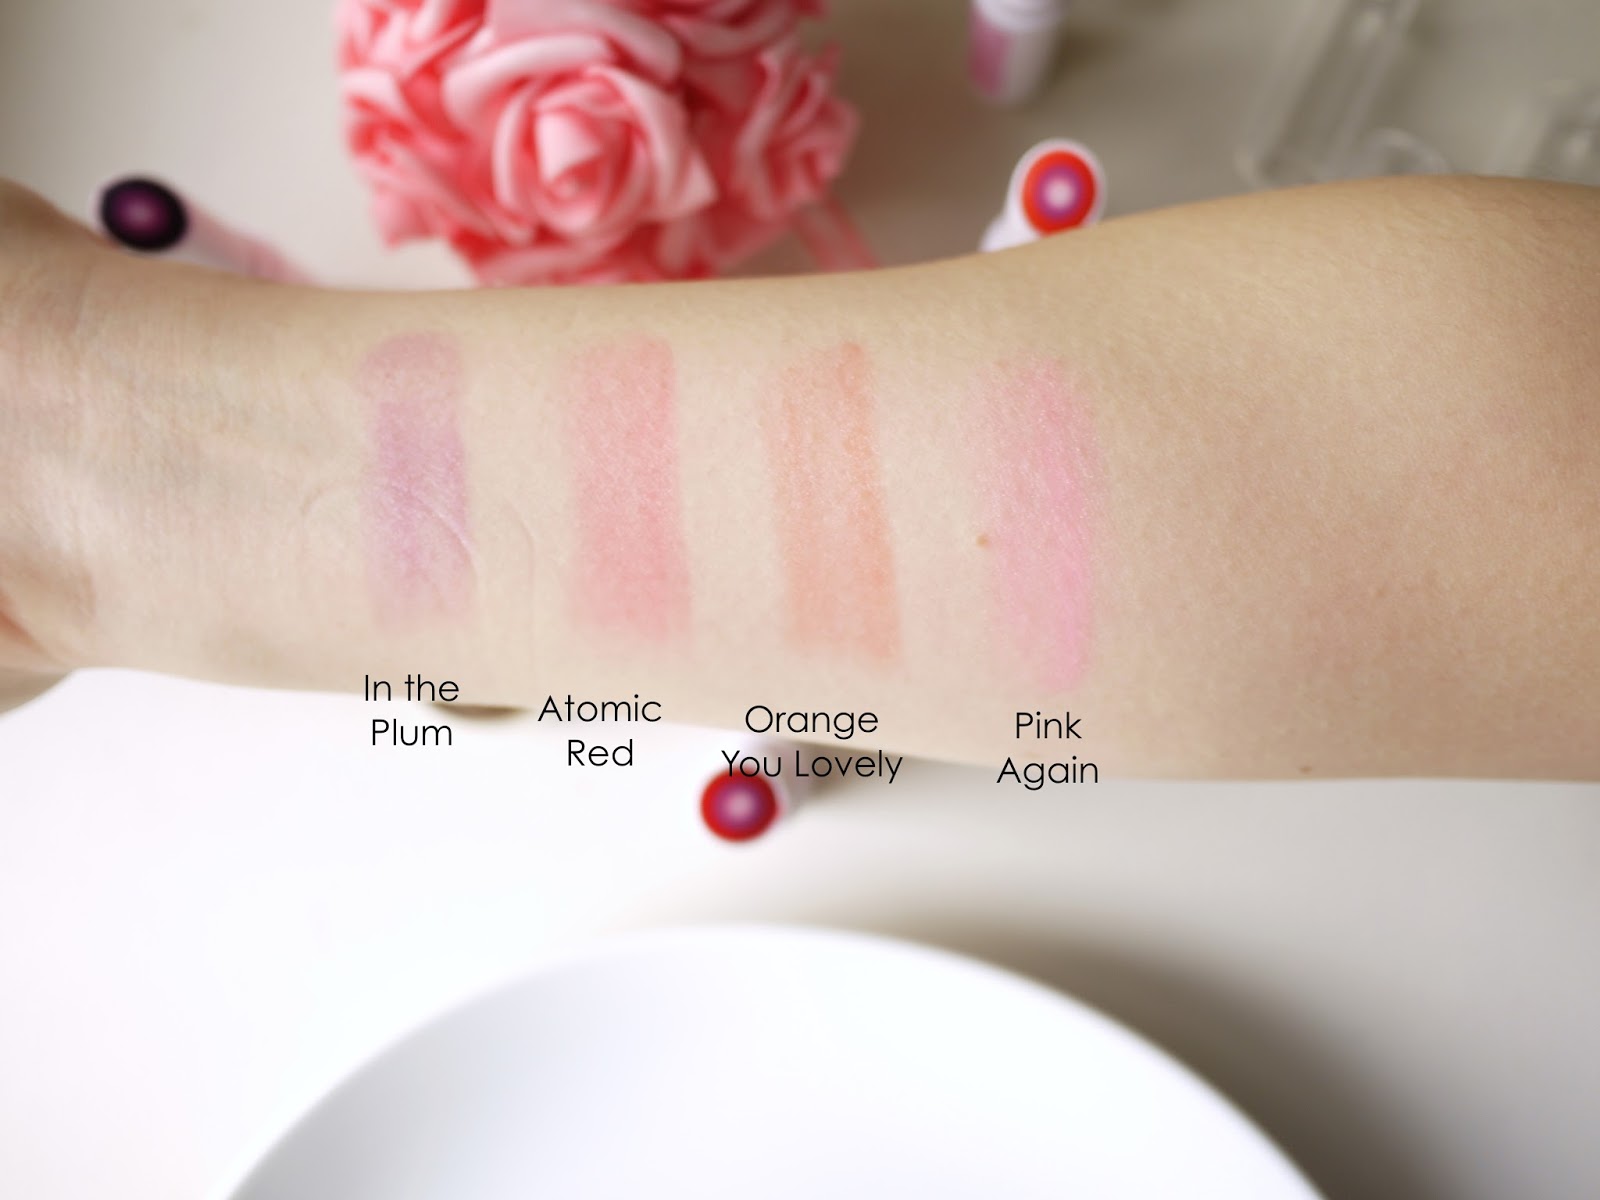 Mary Kay at Play Triple Layer Tinted Lip Balms in the plum pink again, atomic red orange you lovely reviews